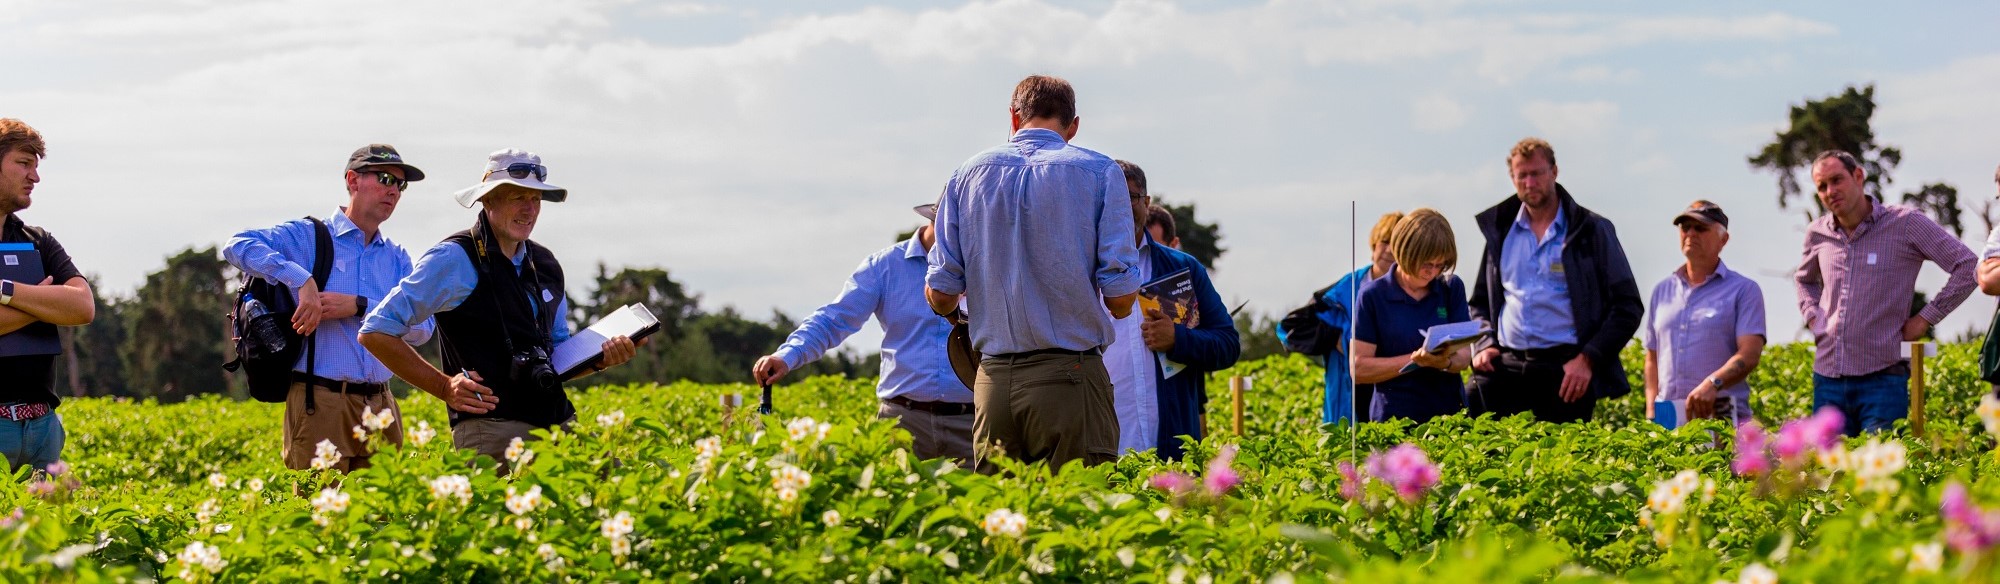 a group of people standing in a field of flowers